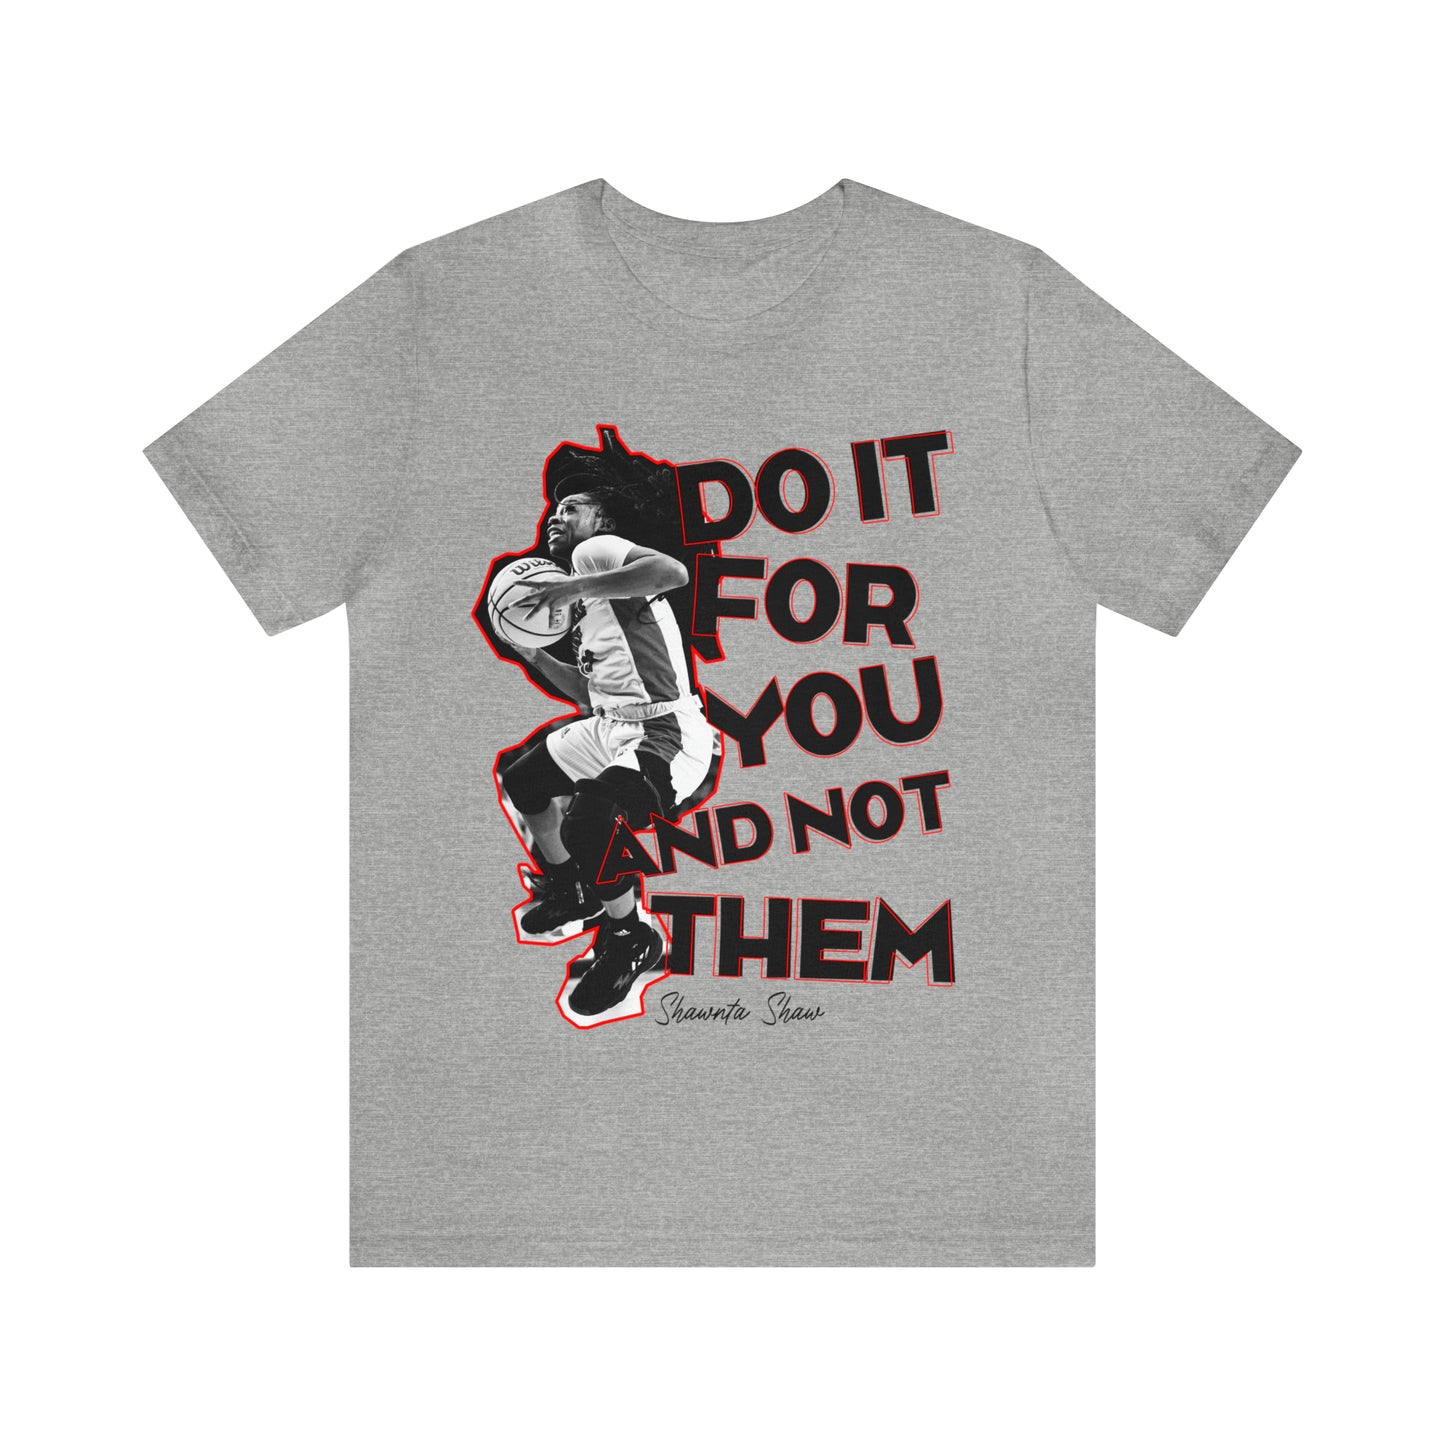 Shawnta Shaw: Do It For You And Not Them Tee